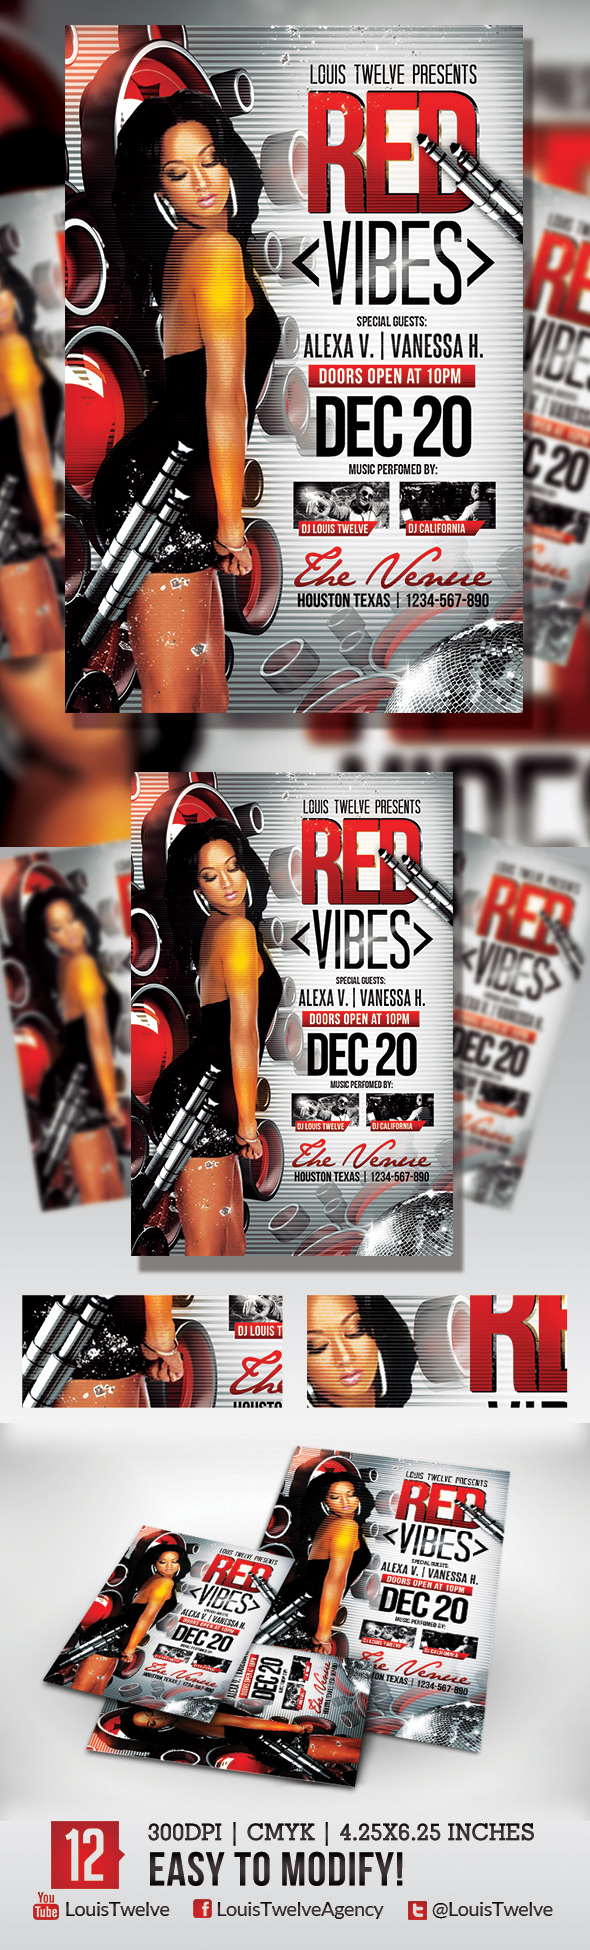 Red Vibes | Flyer Template